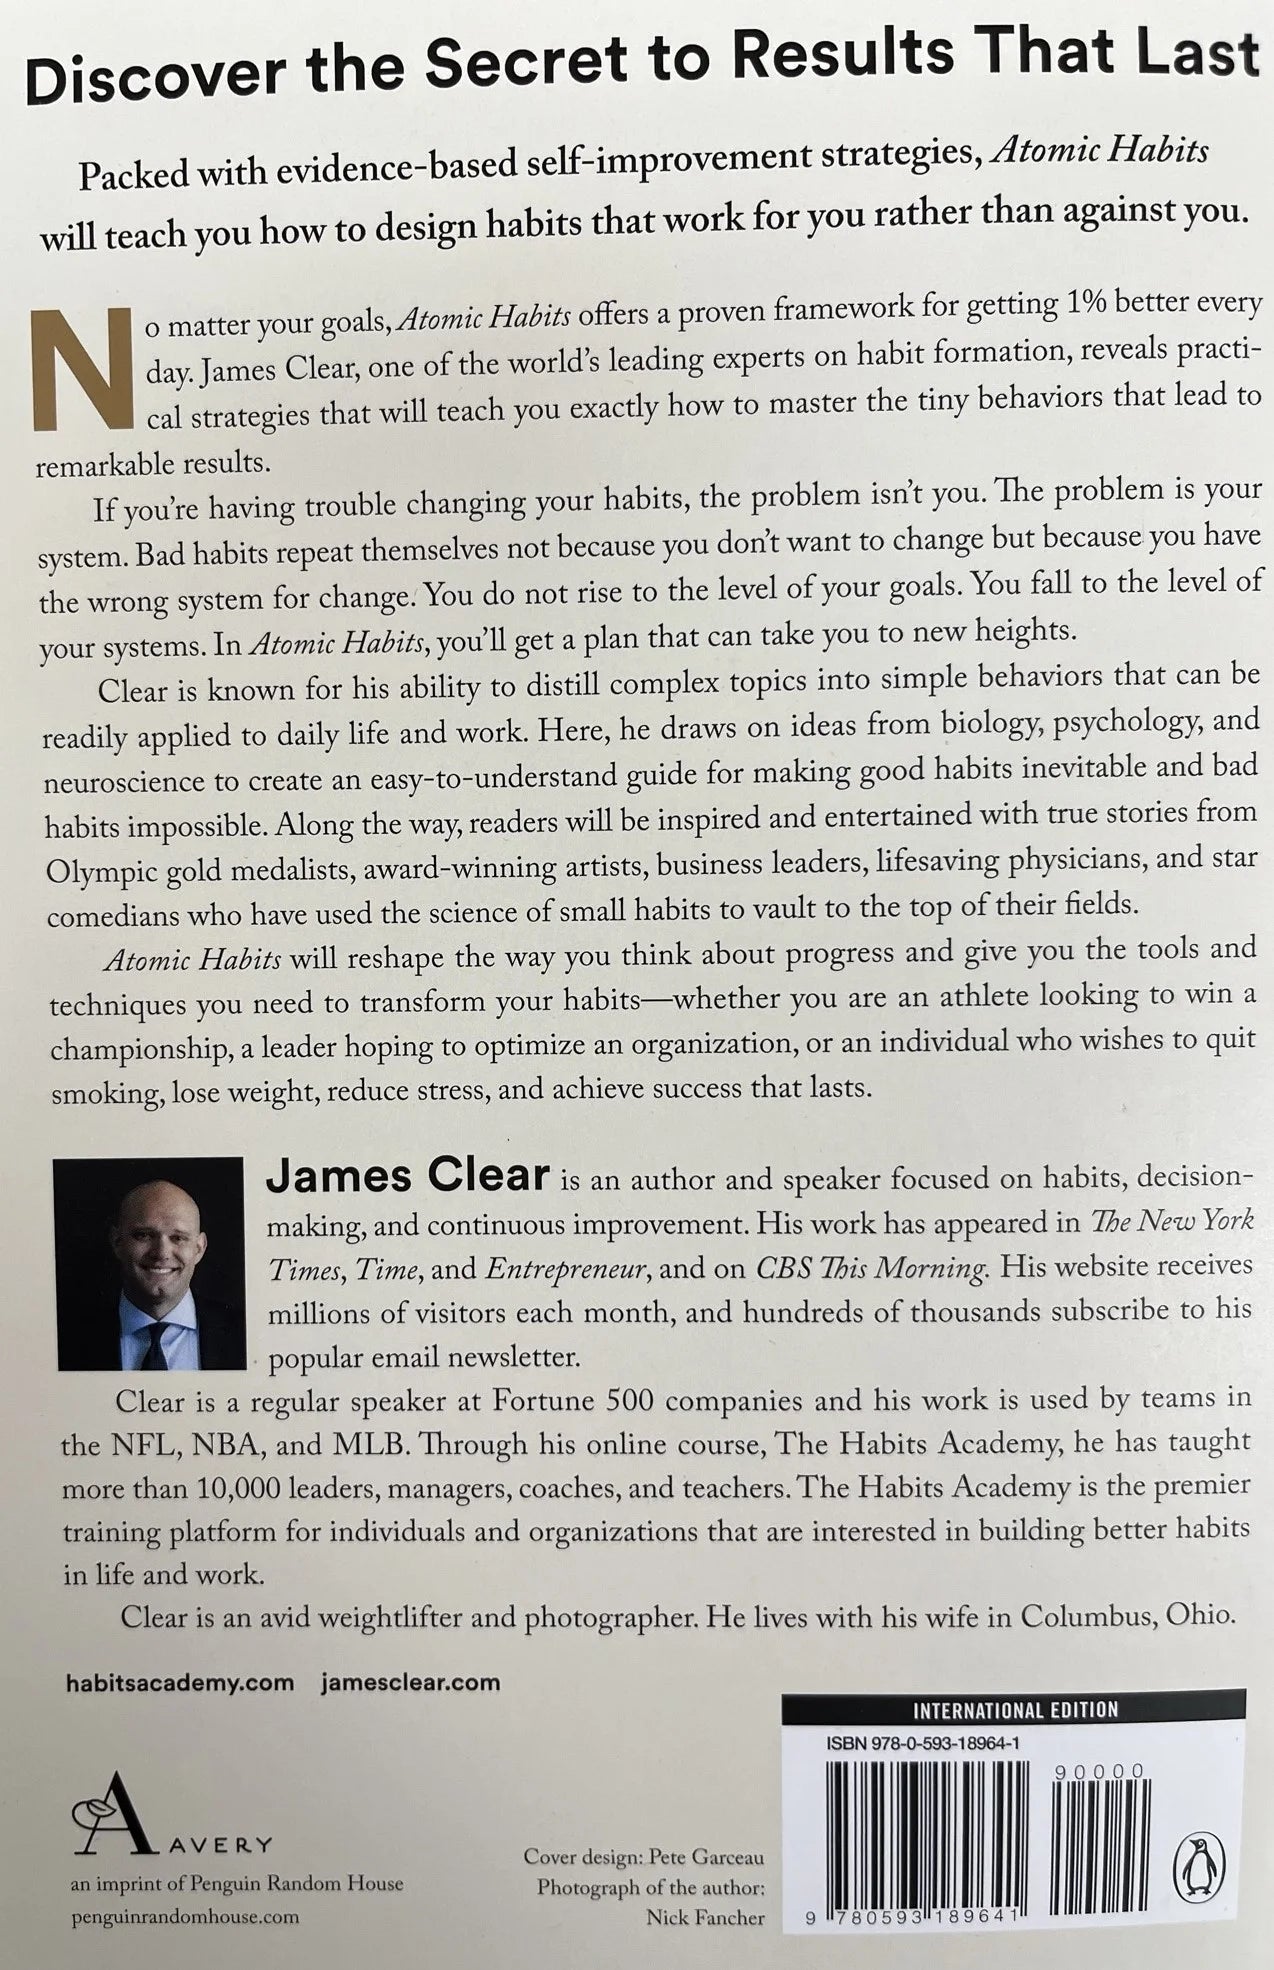 Paperback backcover: Atomic Habits by James Clear